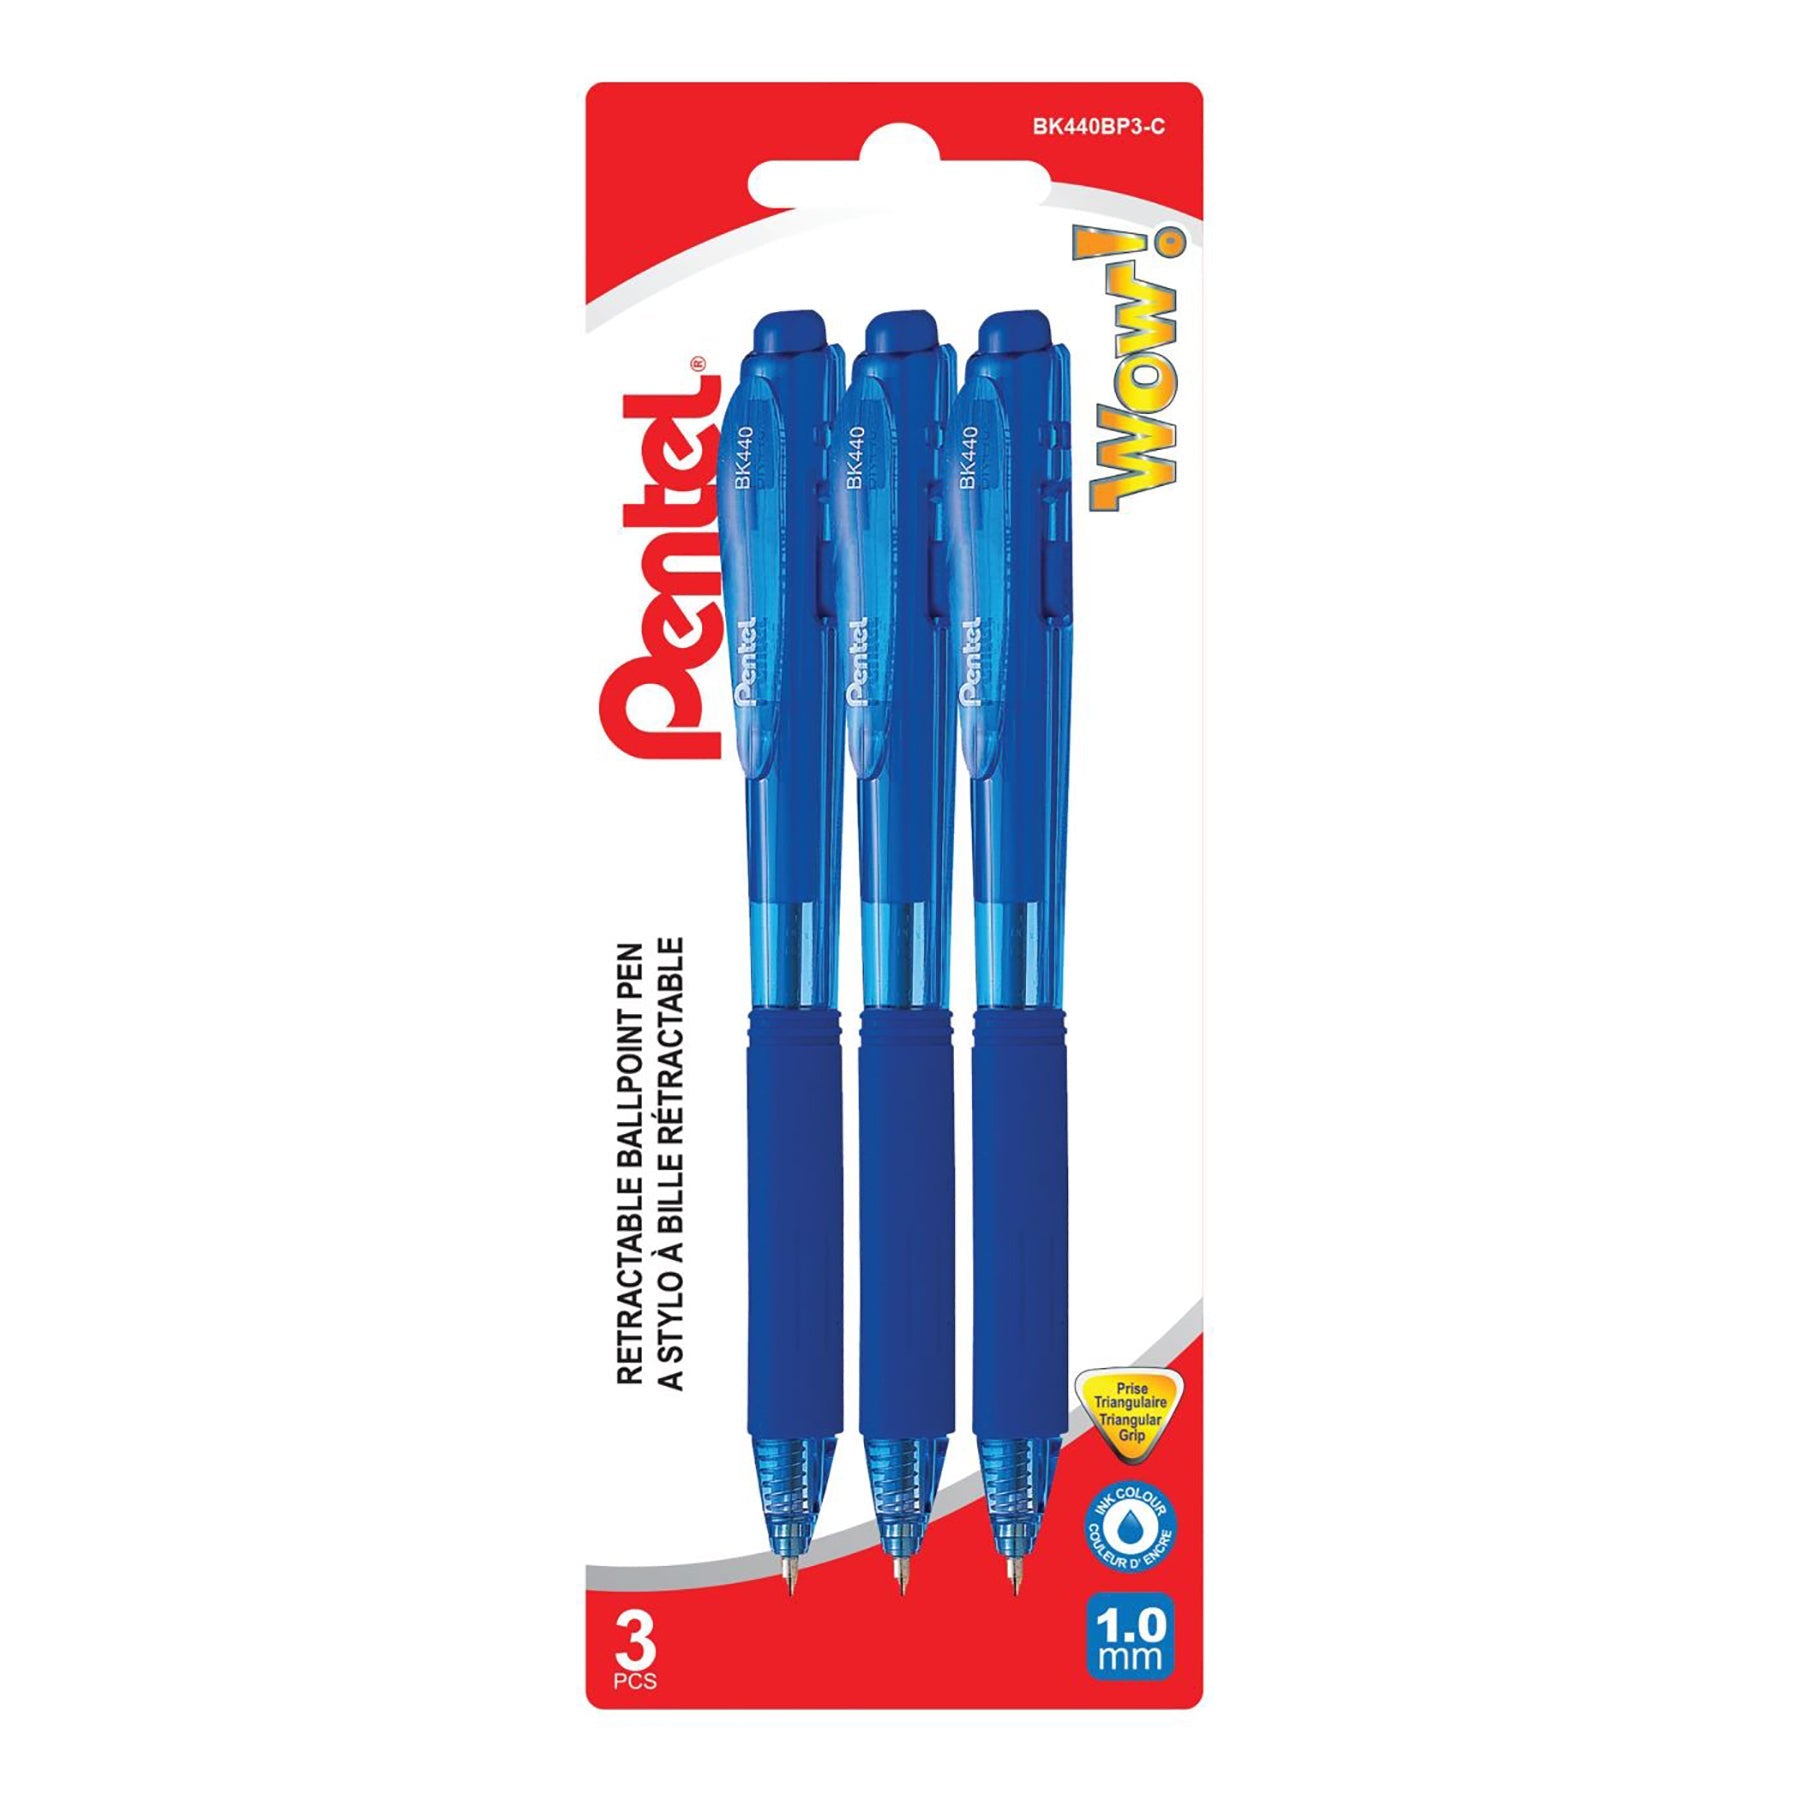 Pentel 3 Retractable Ballpoint Pens - Triangle Grip - Red Ink 1.0mm